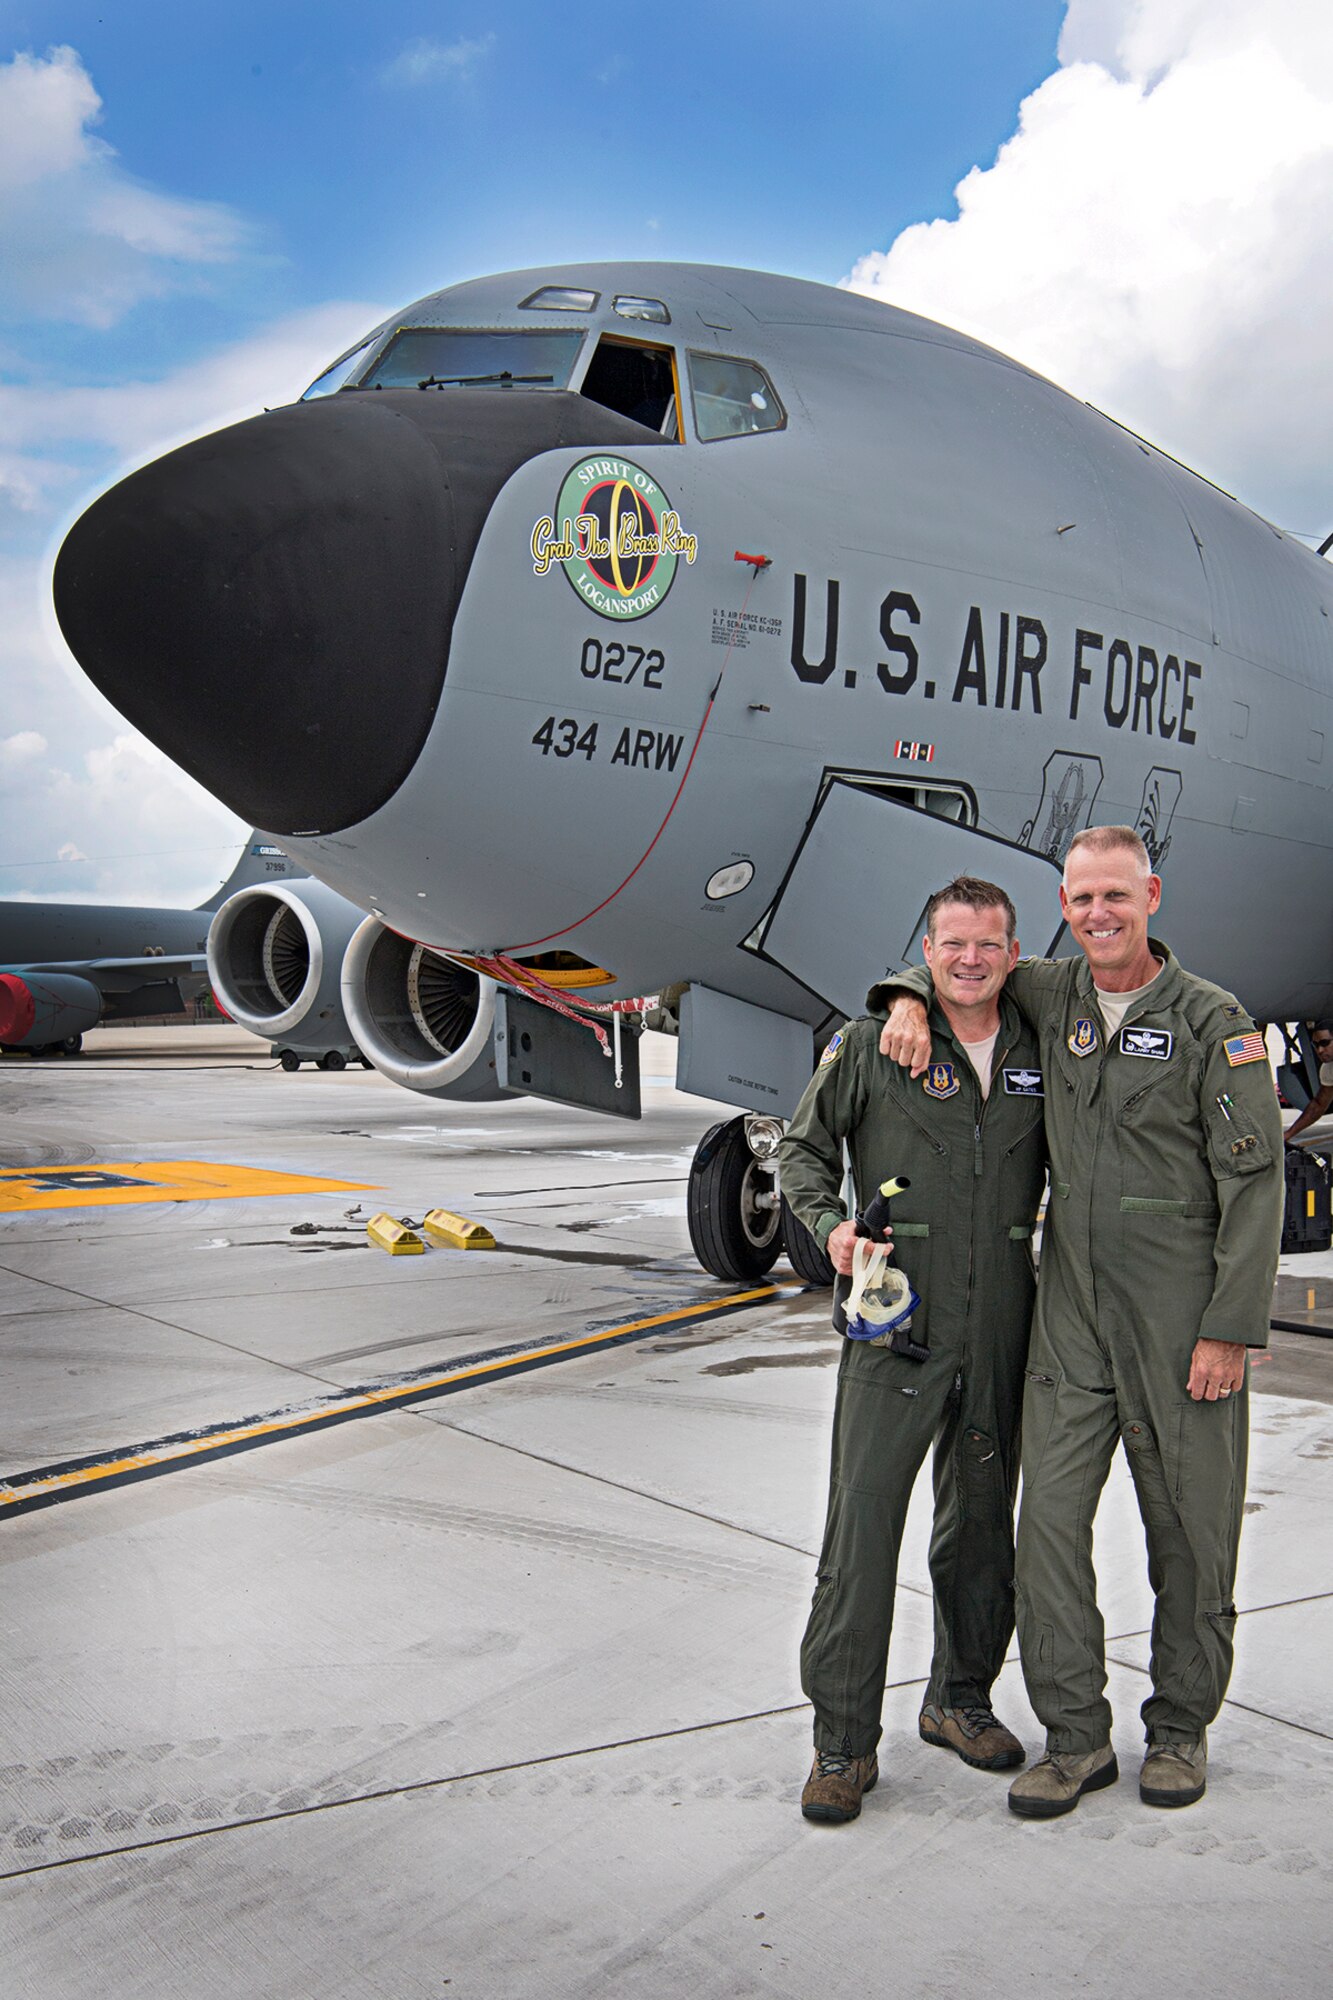 Col. Gates retires after 30 years of service